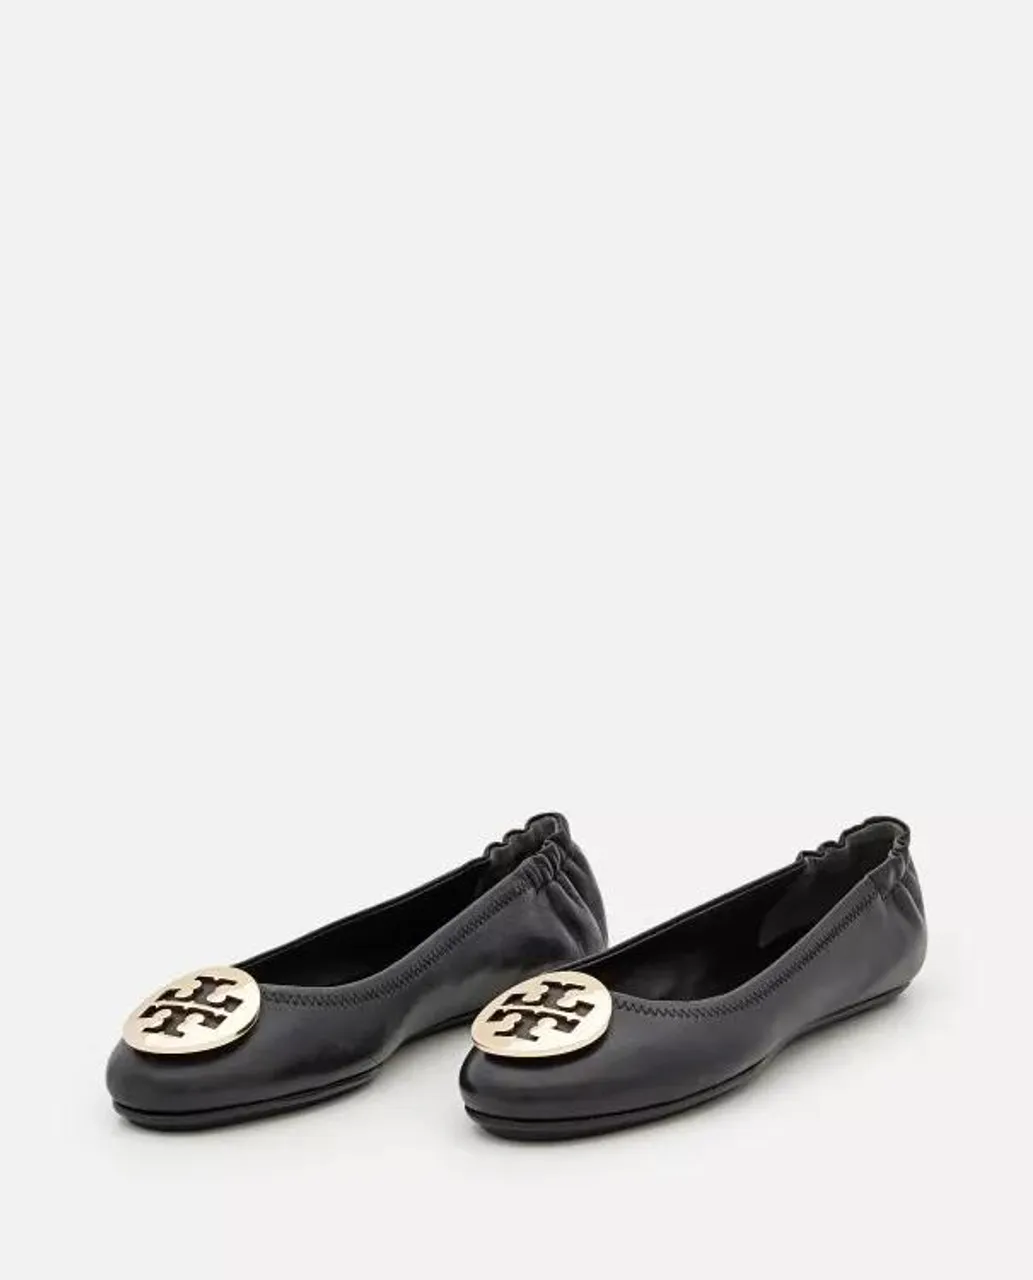 Tory Burch Loafers & Ballet Pumps - Minnie Travel Ballet With Metal Logo - black - Loafers & Ballet Pumps for ladies